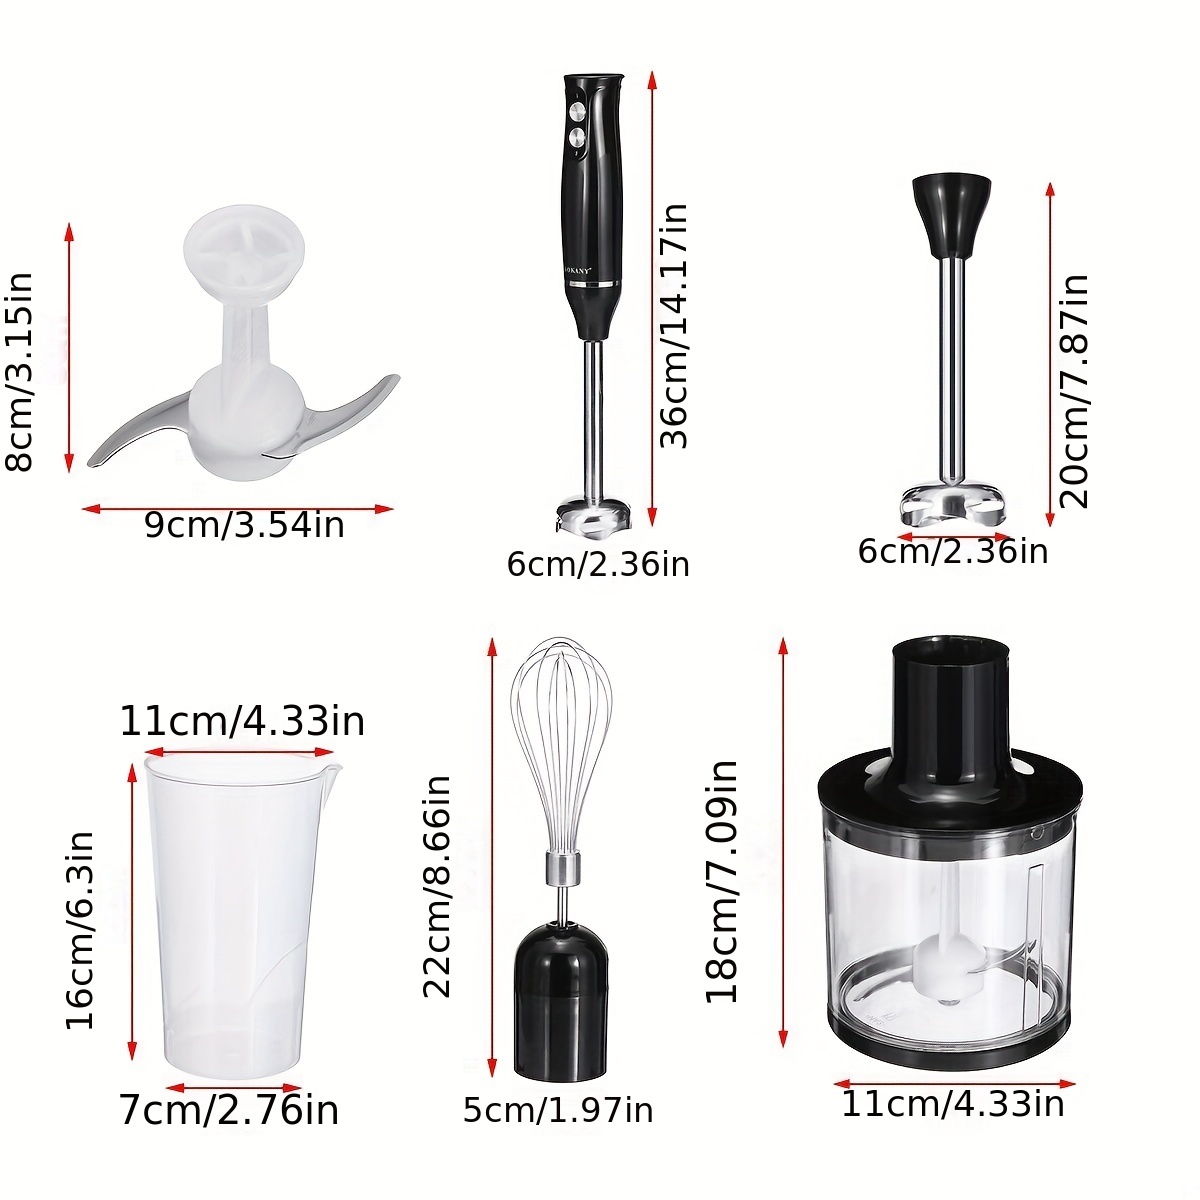 KitchenAid 5-Speed Black Immersion Blender with Whisk and Chopper